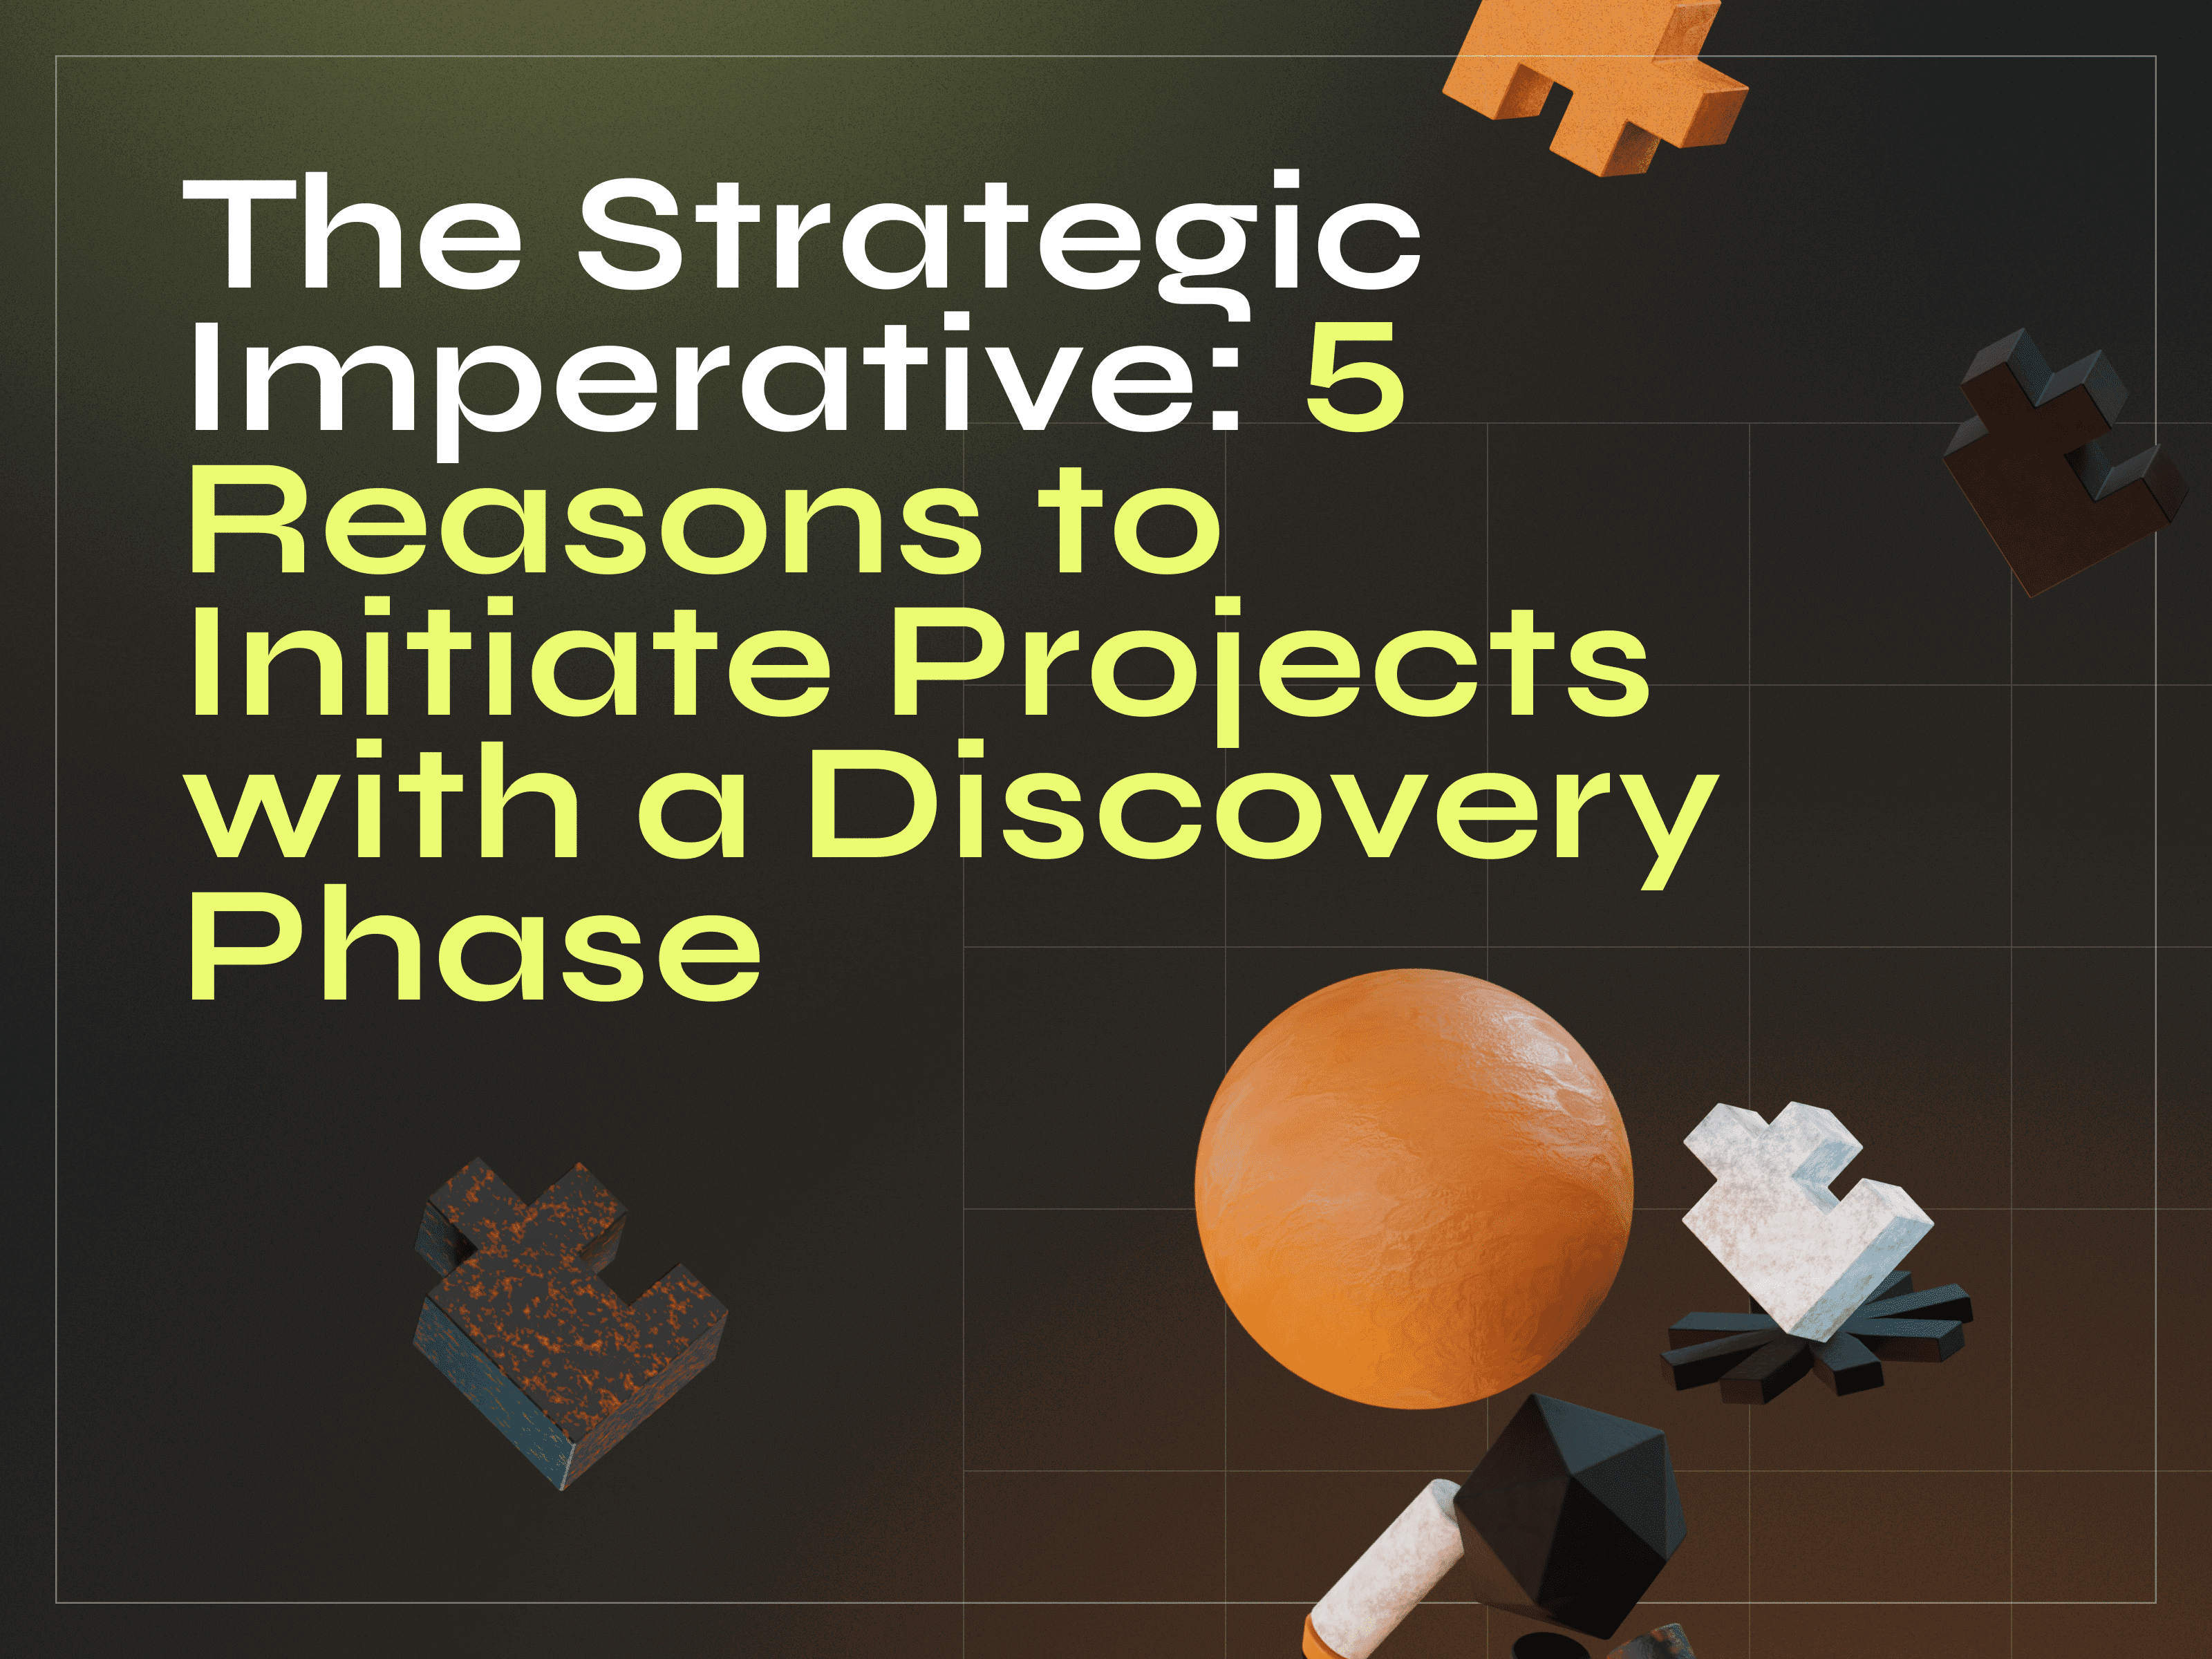 The Strategic Imperative: 5 Reasons to Initiate Projects with a Discovery Phase - Photo 